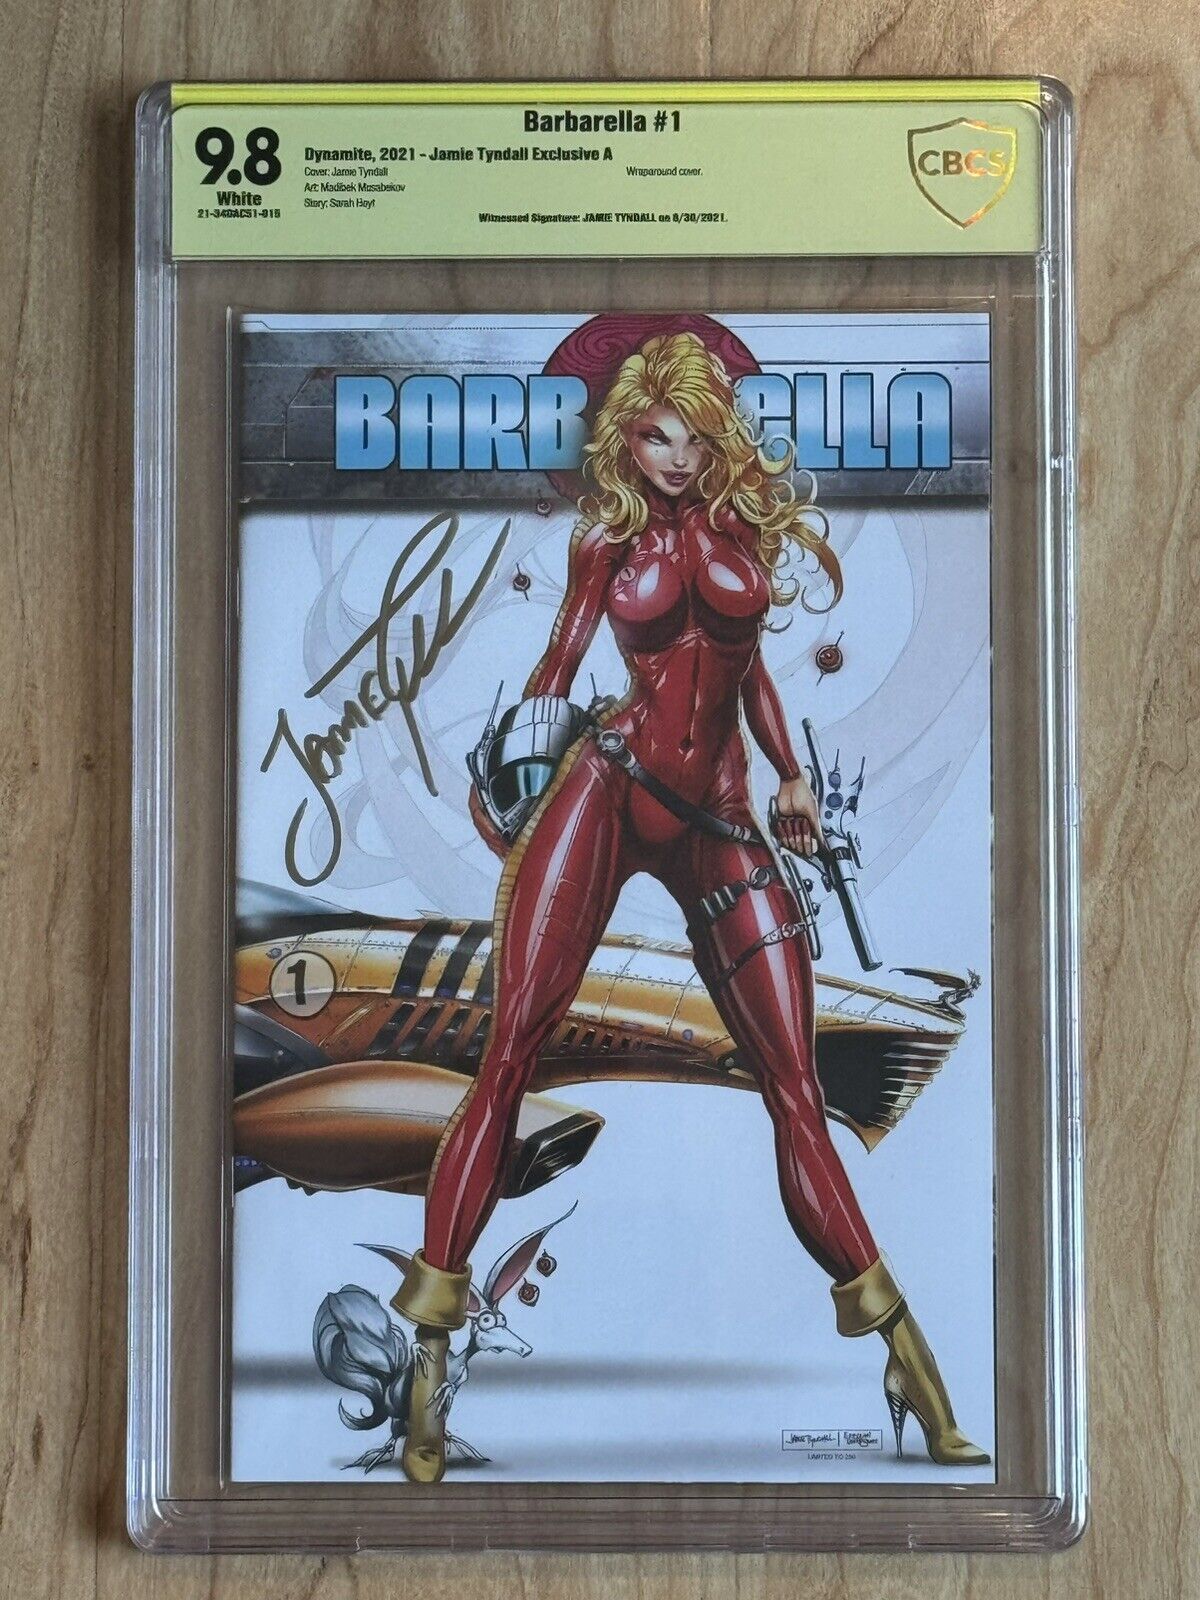 BARBARELLA #1 (2021) CBCS 9.8 SIGNED BY JAMIE TYNDALL DYNAMITE VARIANT A